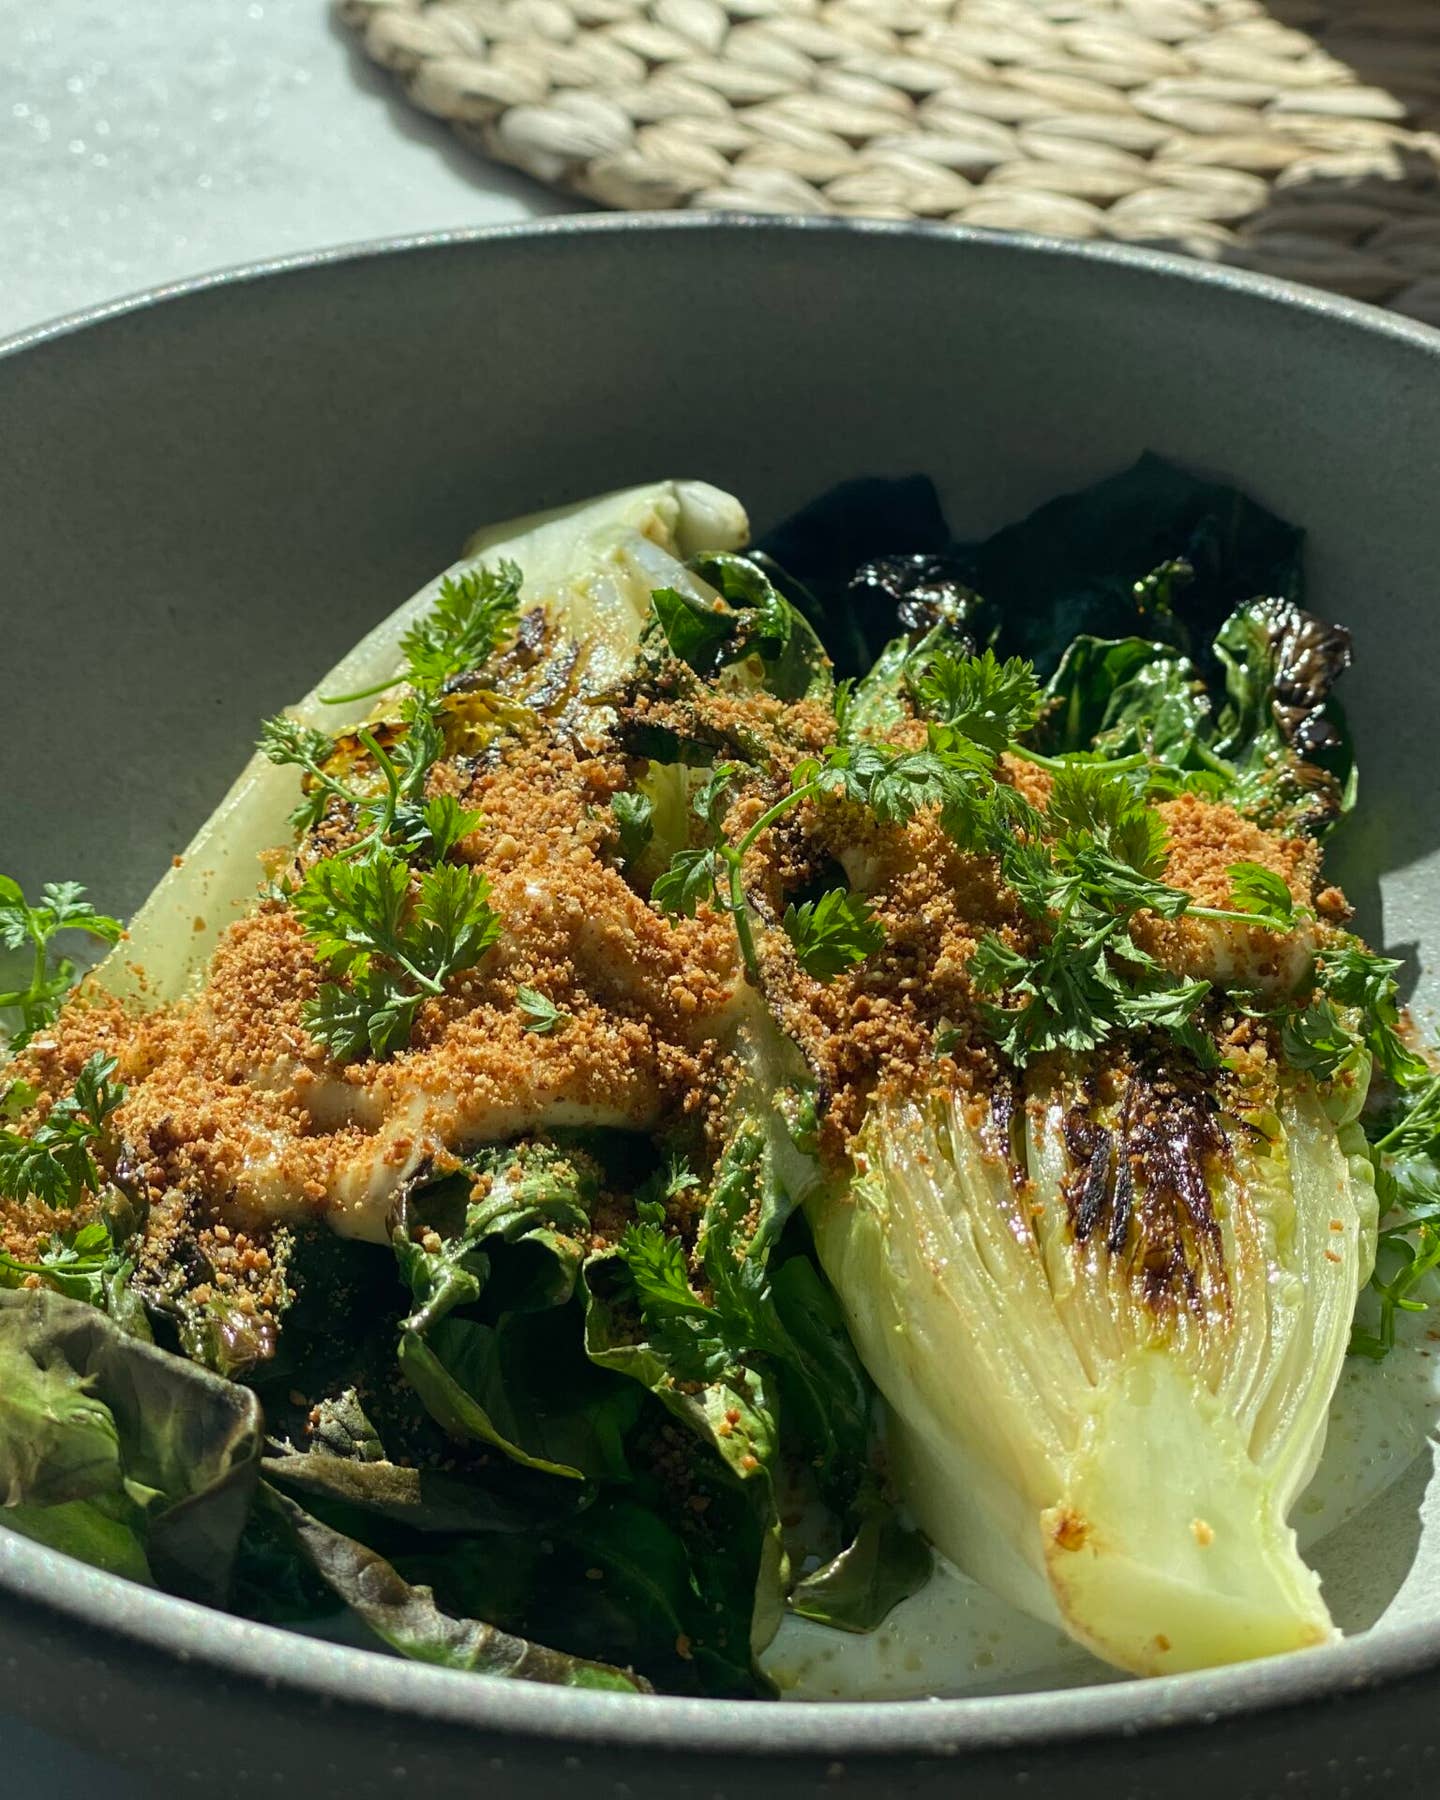 Seared Little Gem Lettuce with Buttermilk, Anchovy, and Bread Crumbs